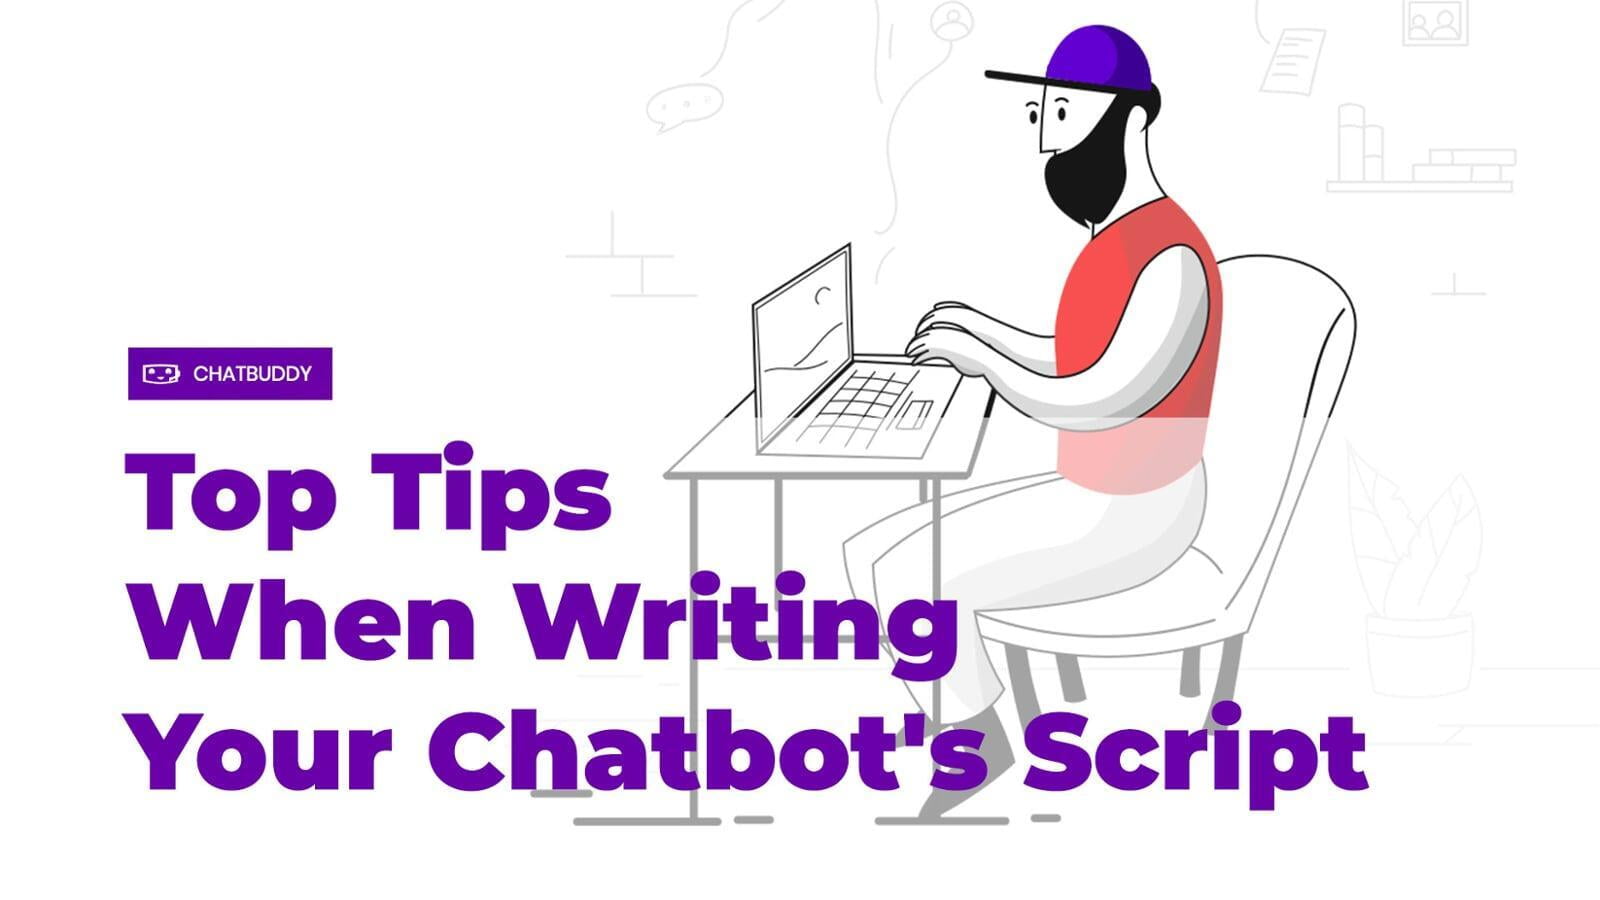 Top Tips When Writing Your Chatbot's Script